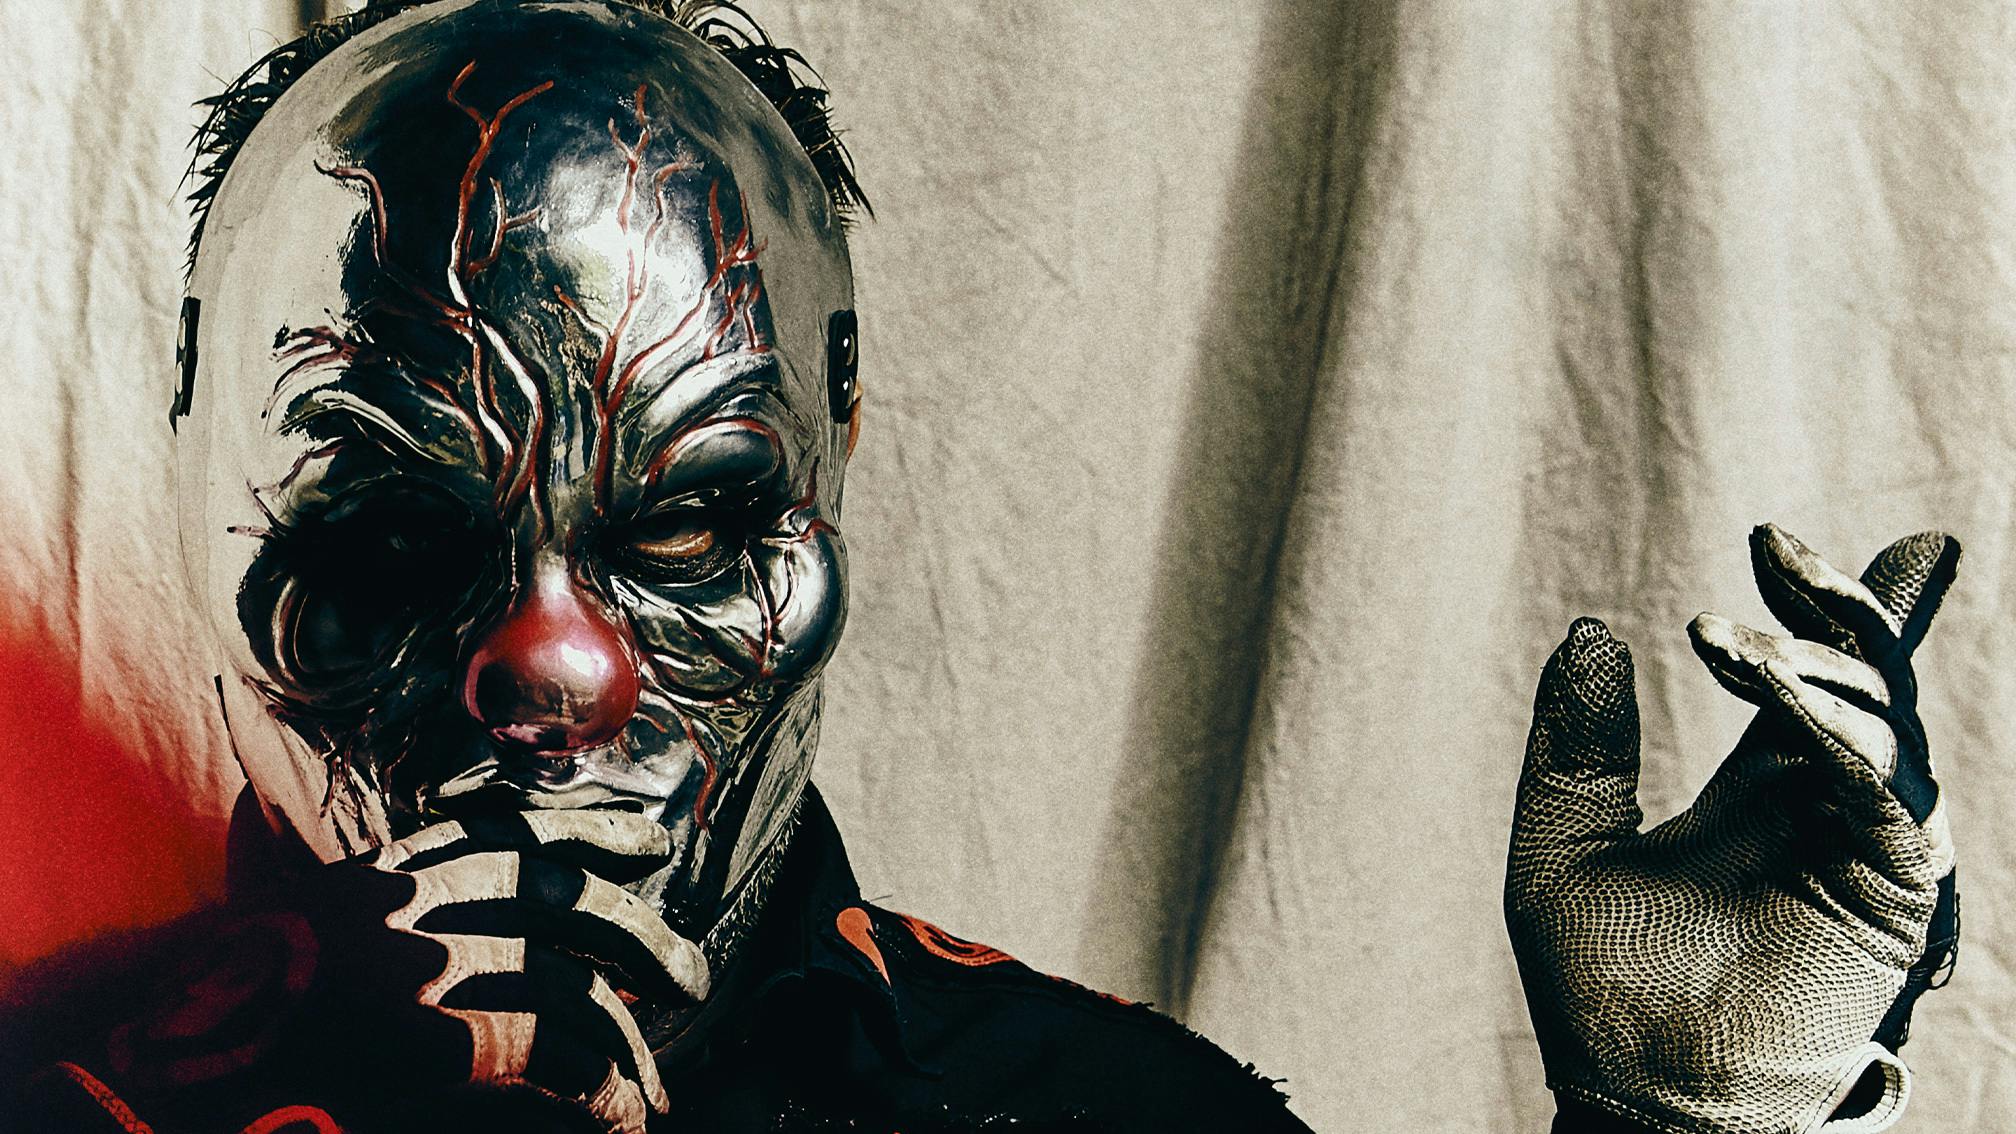 Clown to sit out of current Slipknot shows to support his wife “through some health issues”